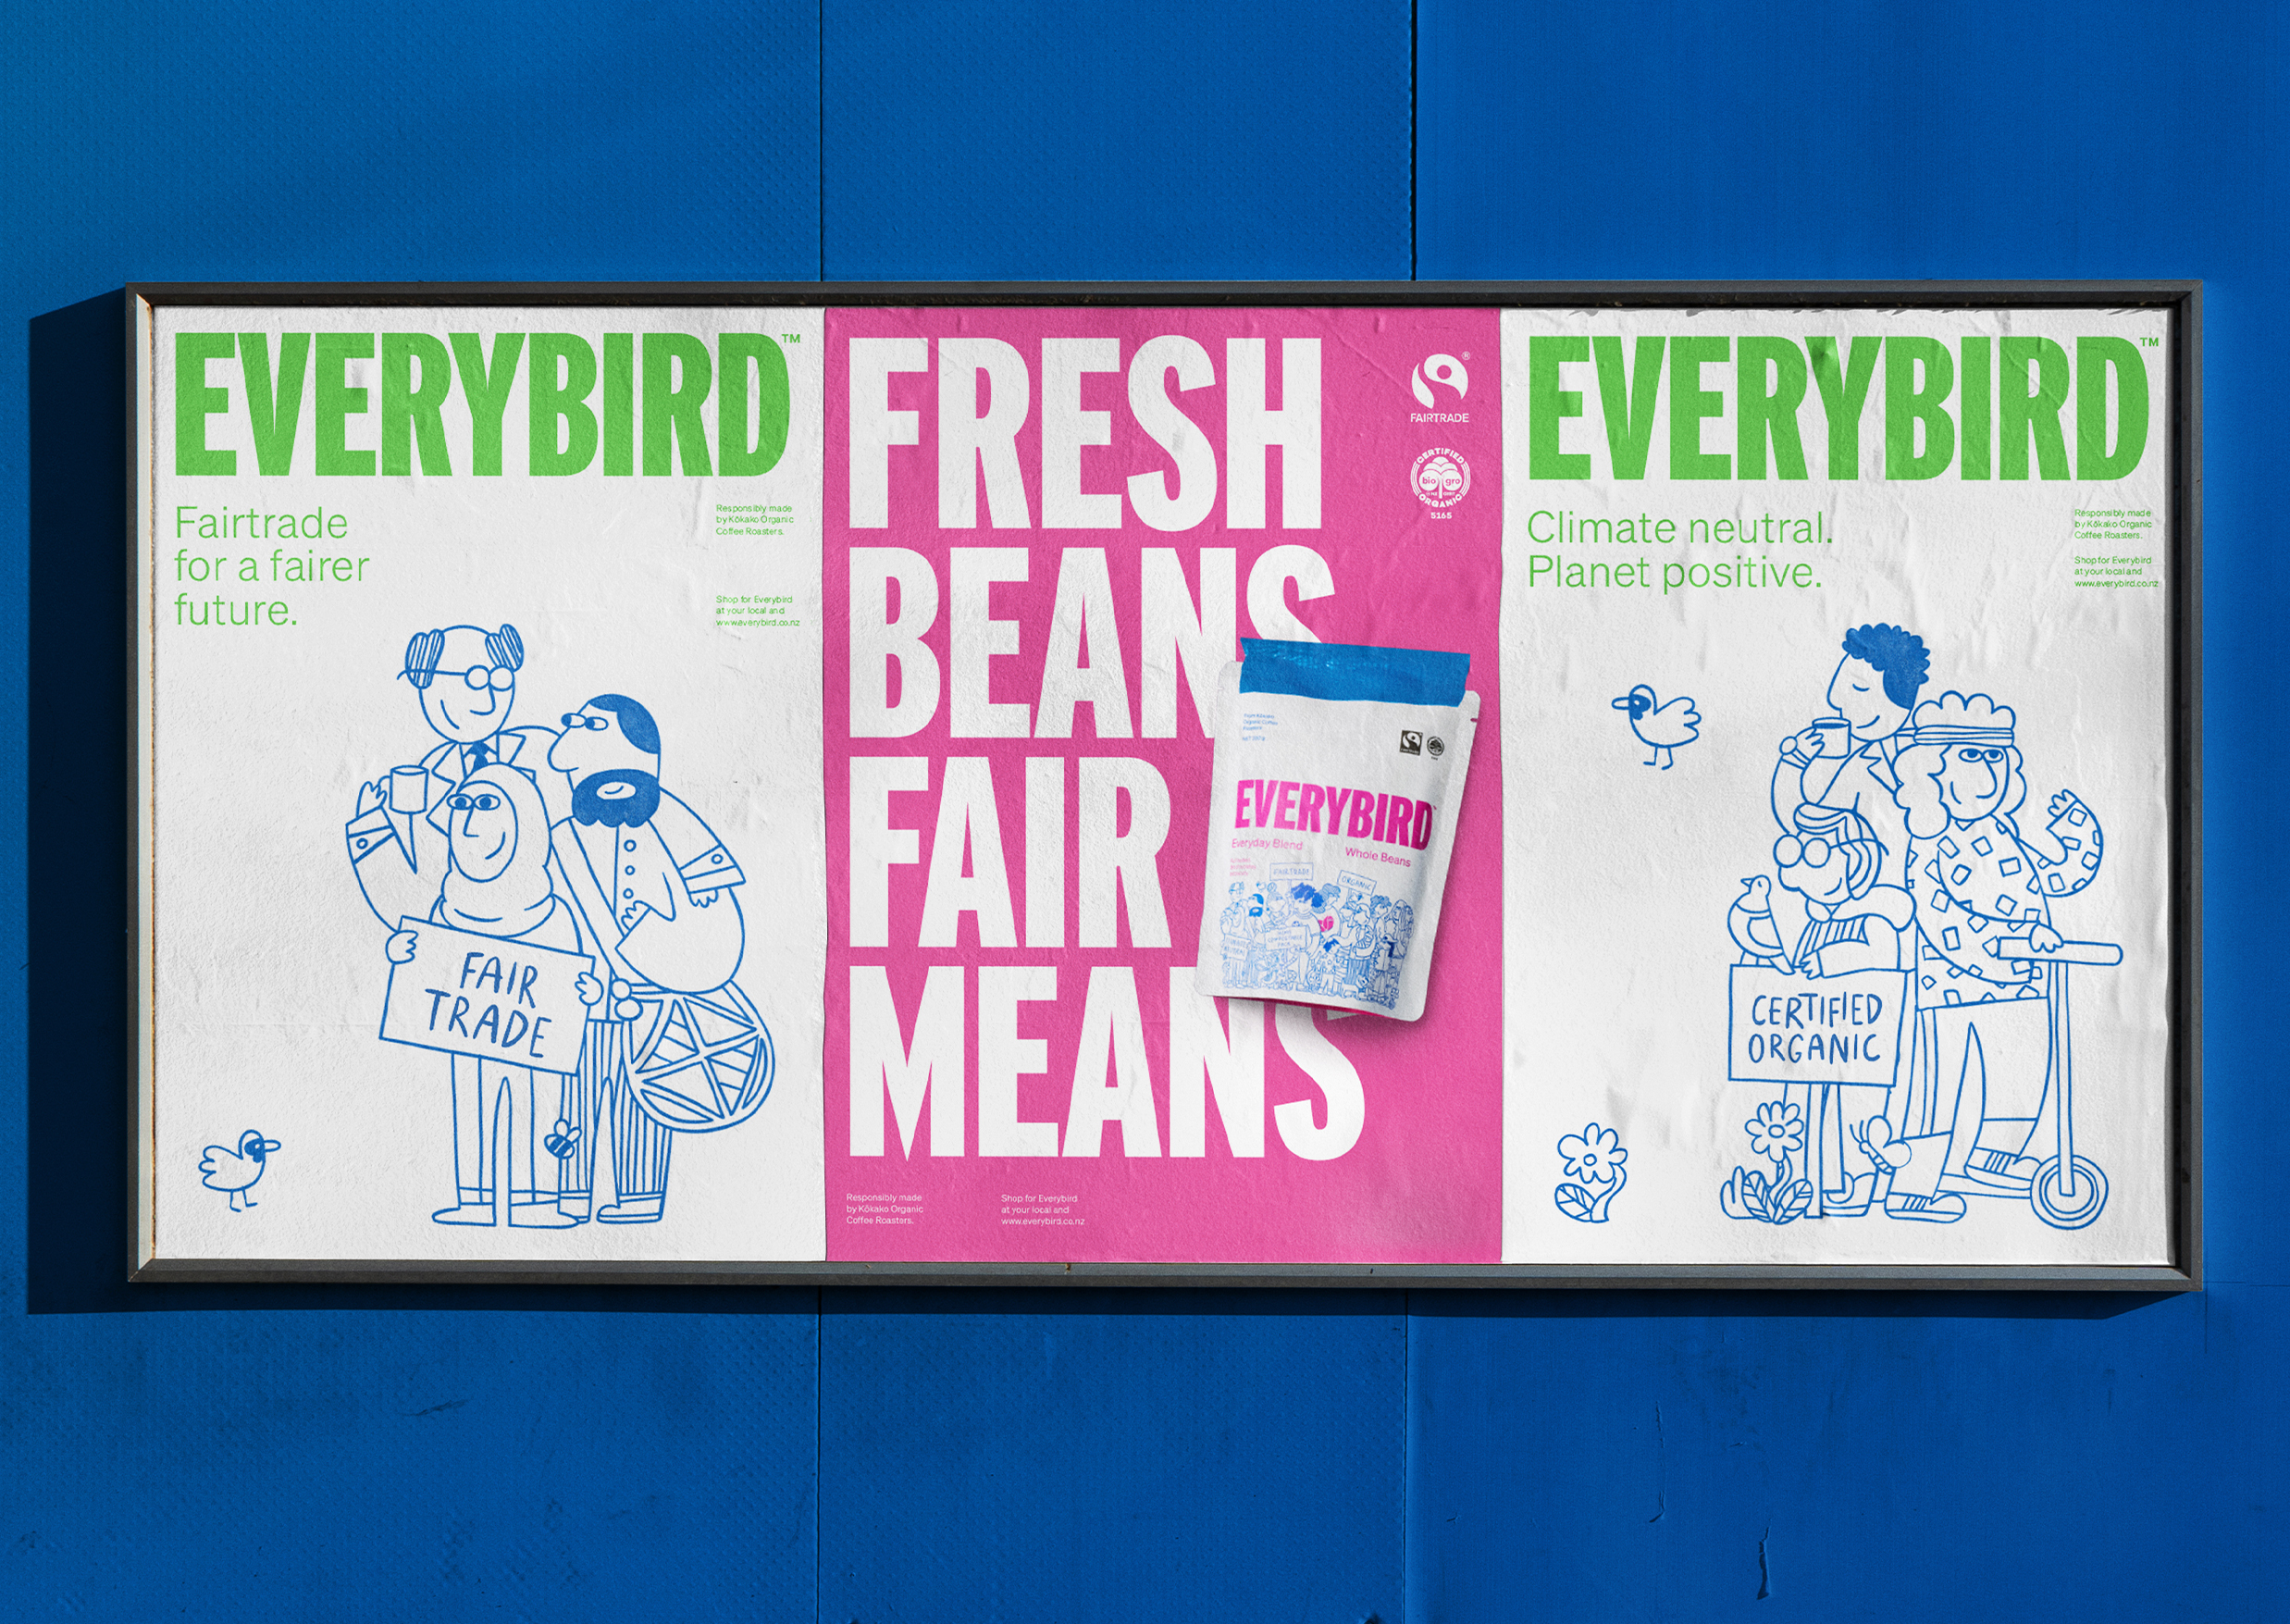 Outdoor print campaign and posters by Marx Design for ethical New Zealand coffee brand Everybird